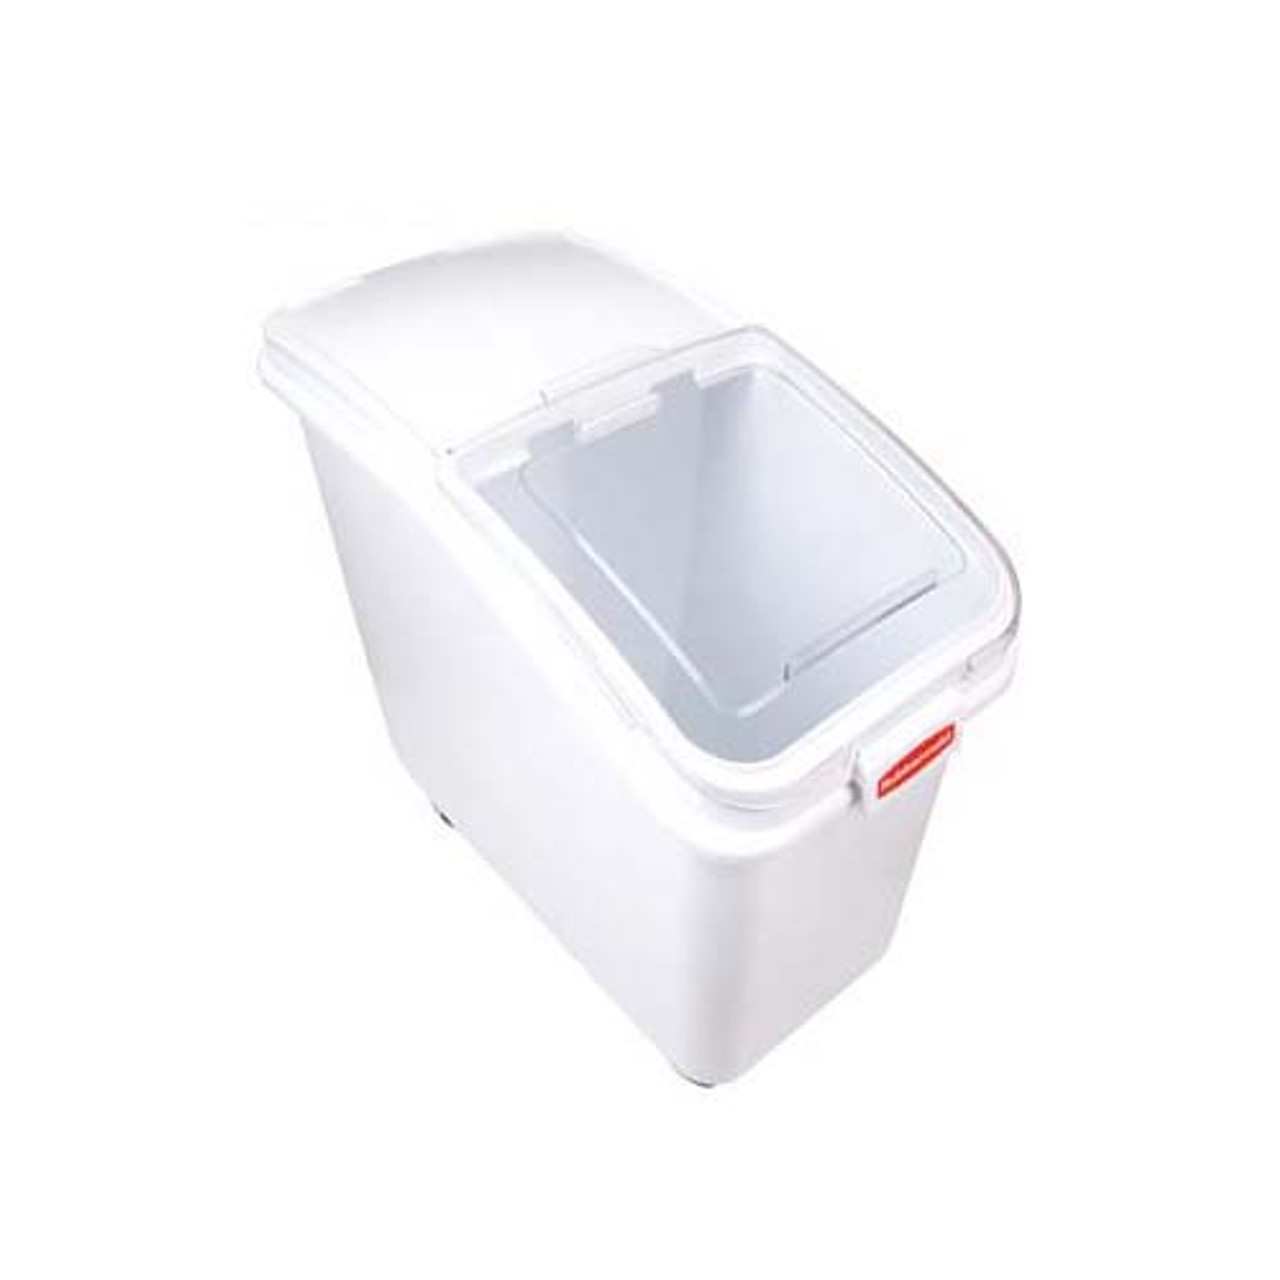 Ingredient Bin 26 Rubber White - Replacement Part For Rubbermaid RBMD3602